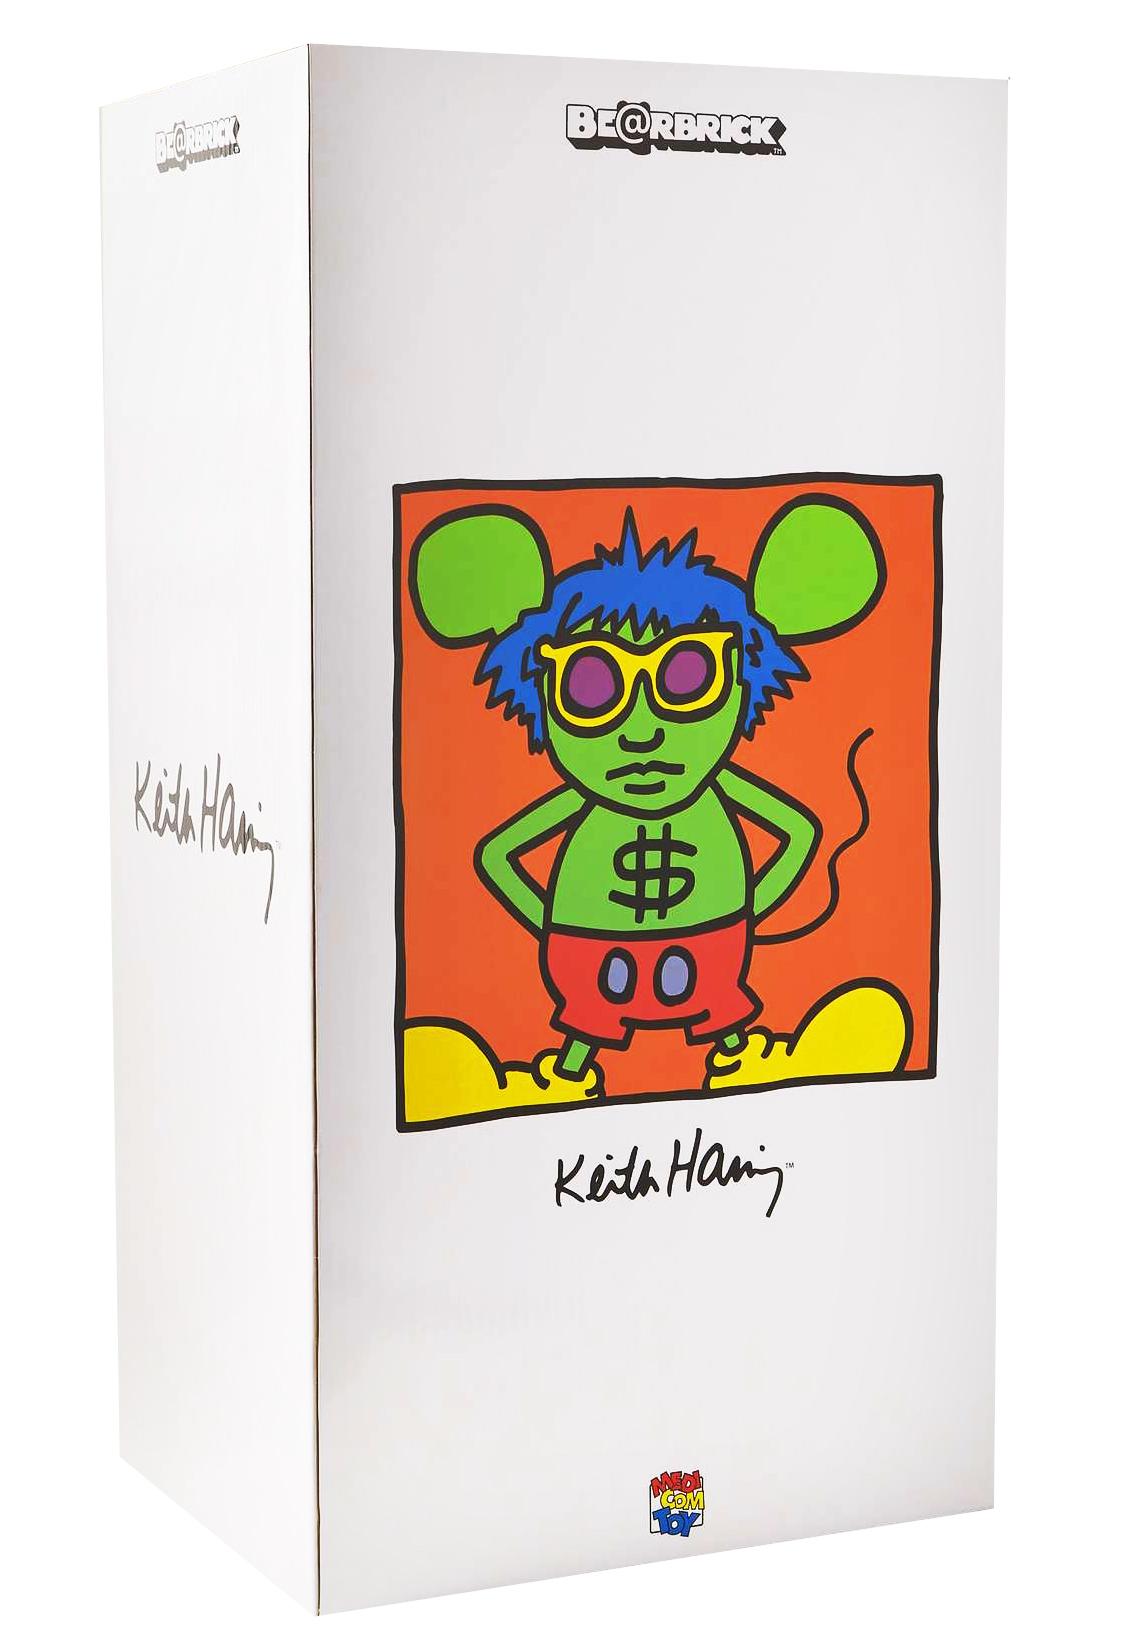 Keith Haring Bearbrick 400% set of 2 works (Haring BE@RBRICK) For Sale 3